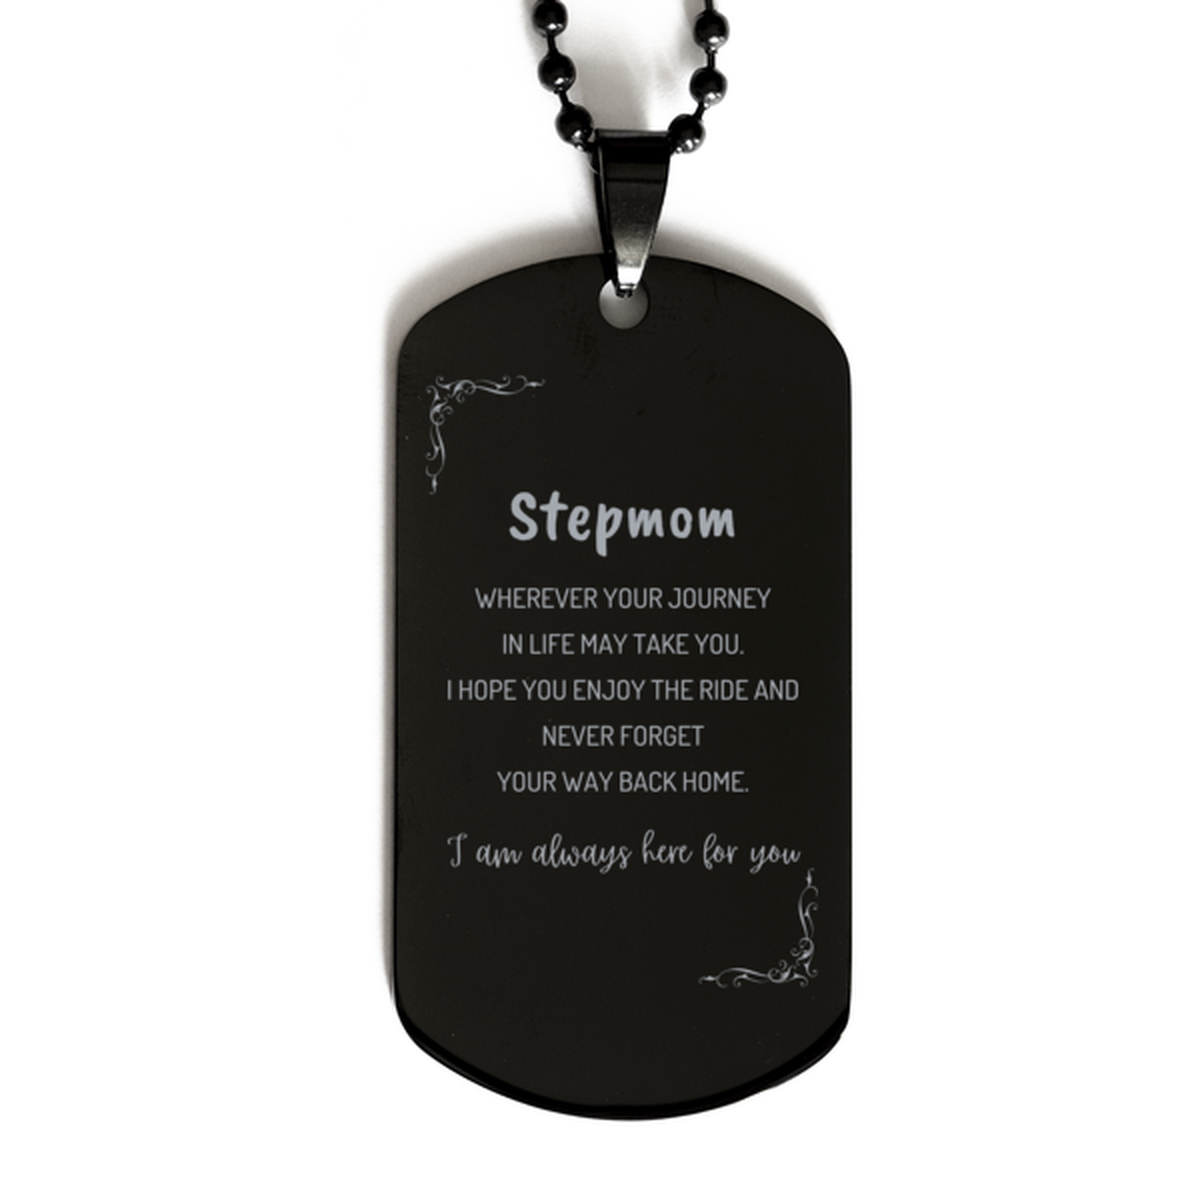 Stepmom wherever your journey in life may take you, I am always here for you Stepmom Black Dog Tag, Awesome Christmas Gifts For Stepmom, Stepmom Birthday Gifts for Men Women Family Loved One